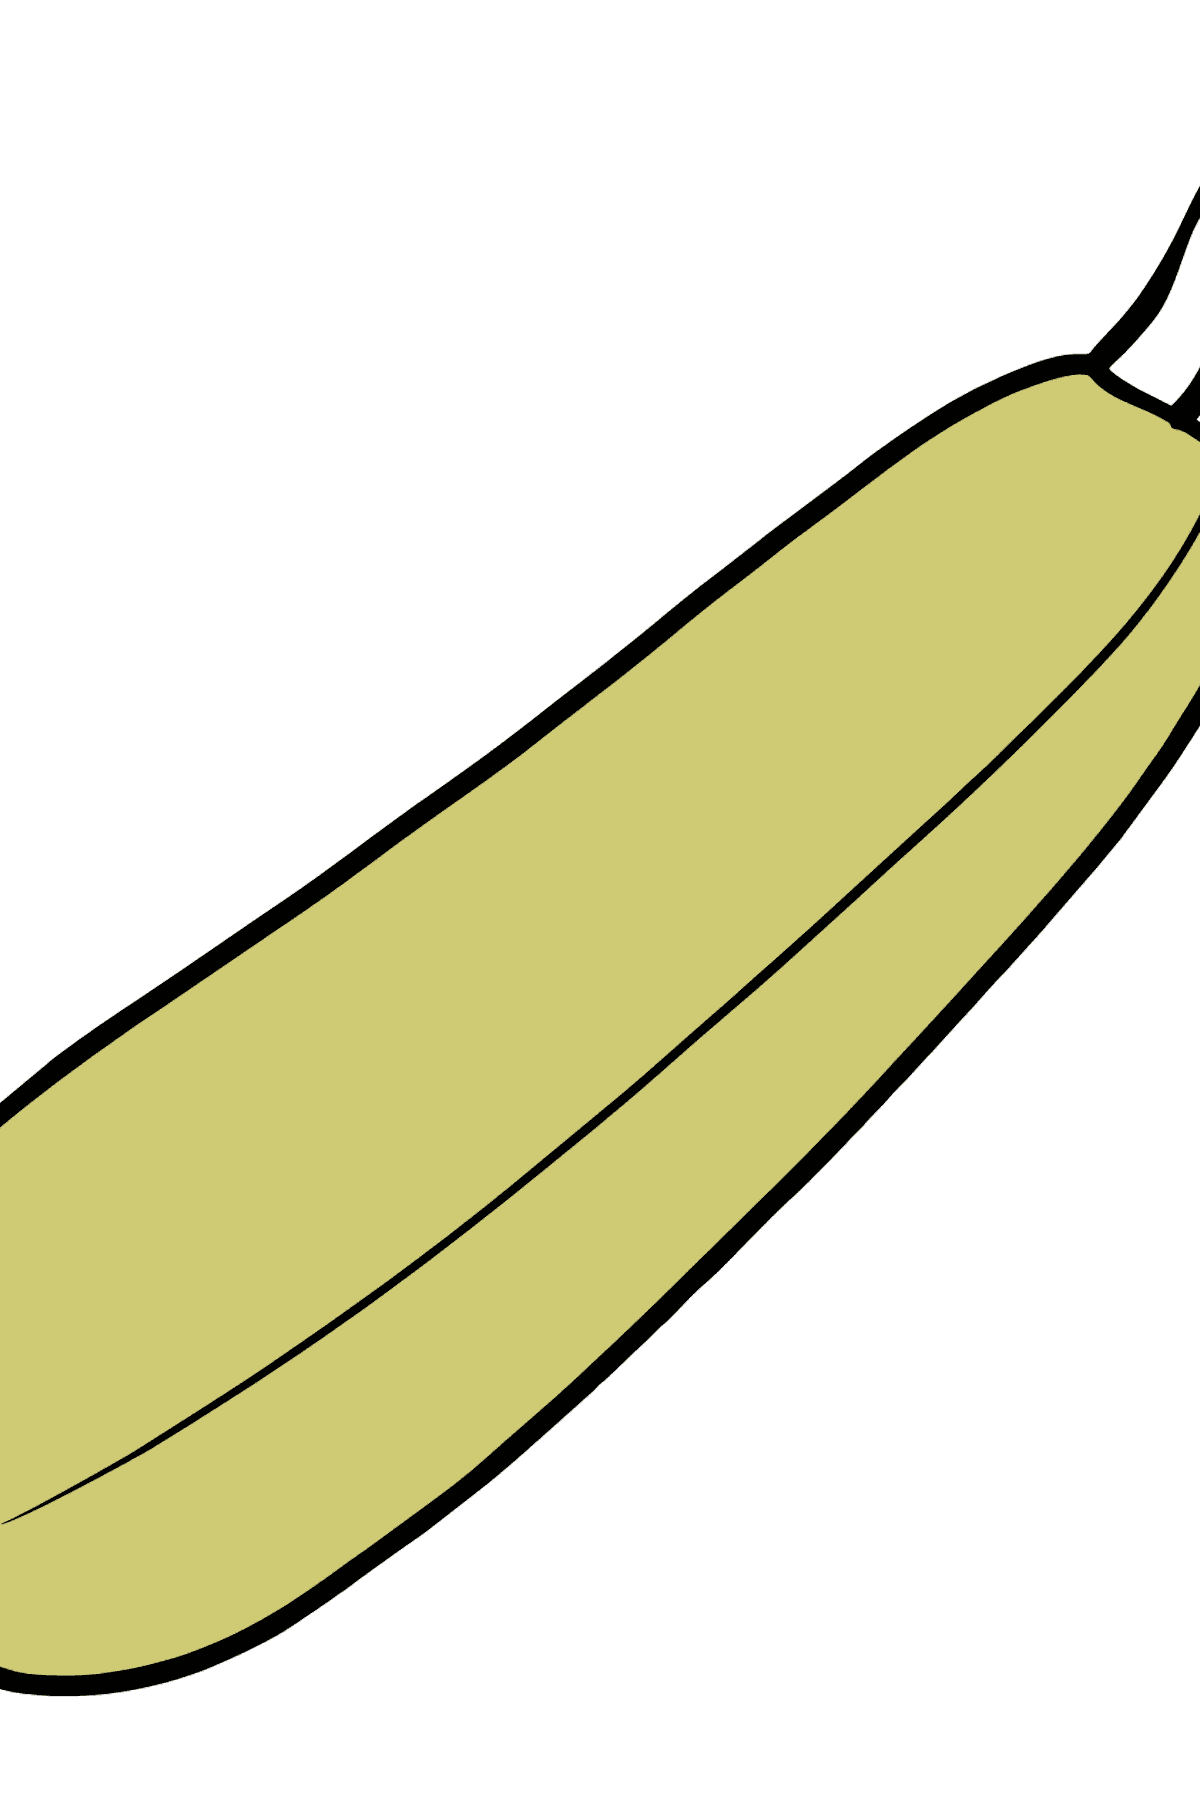 Zucchini coloring page - Coloring Pages for Kids